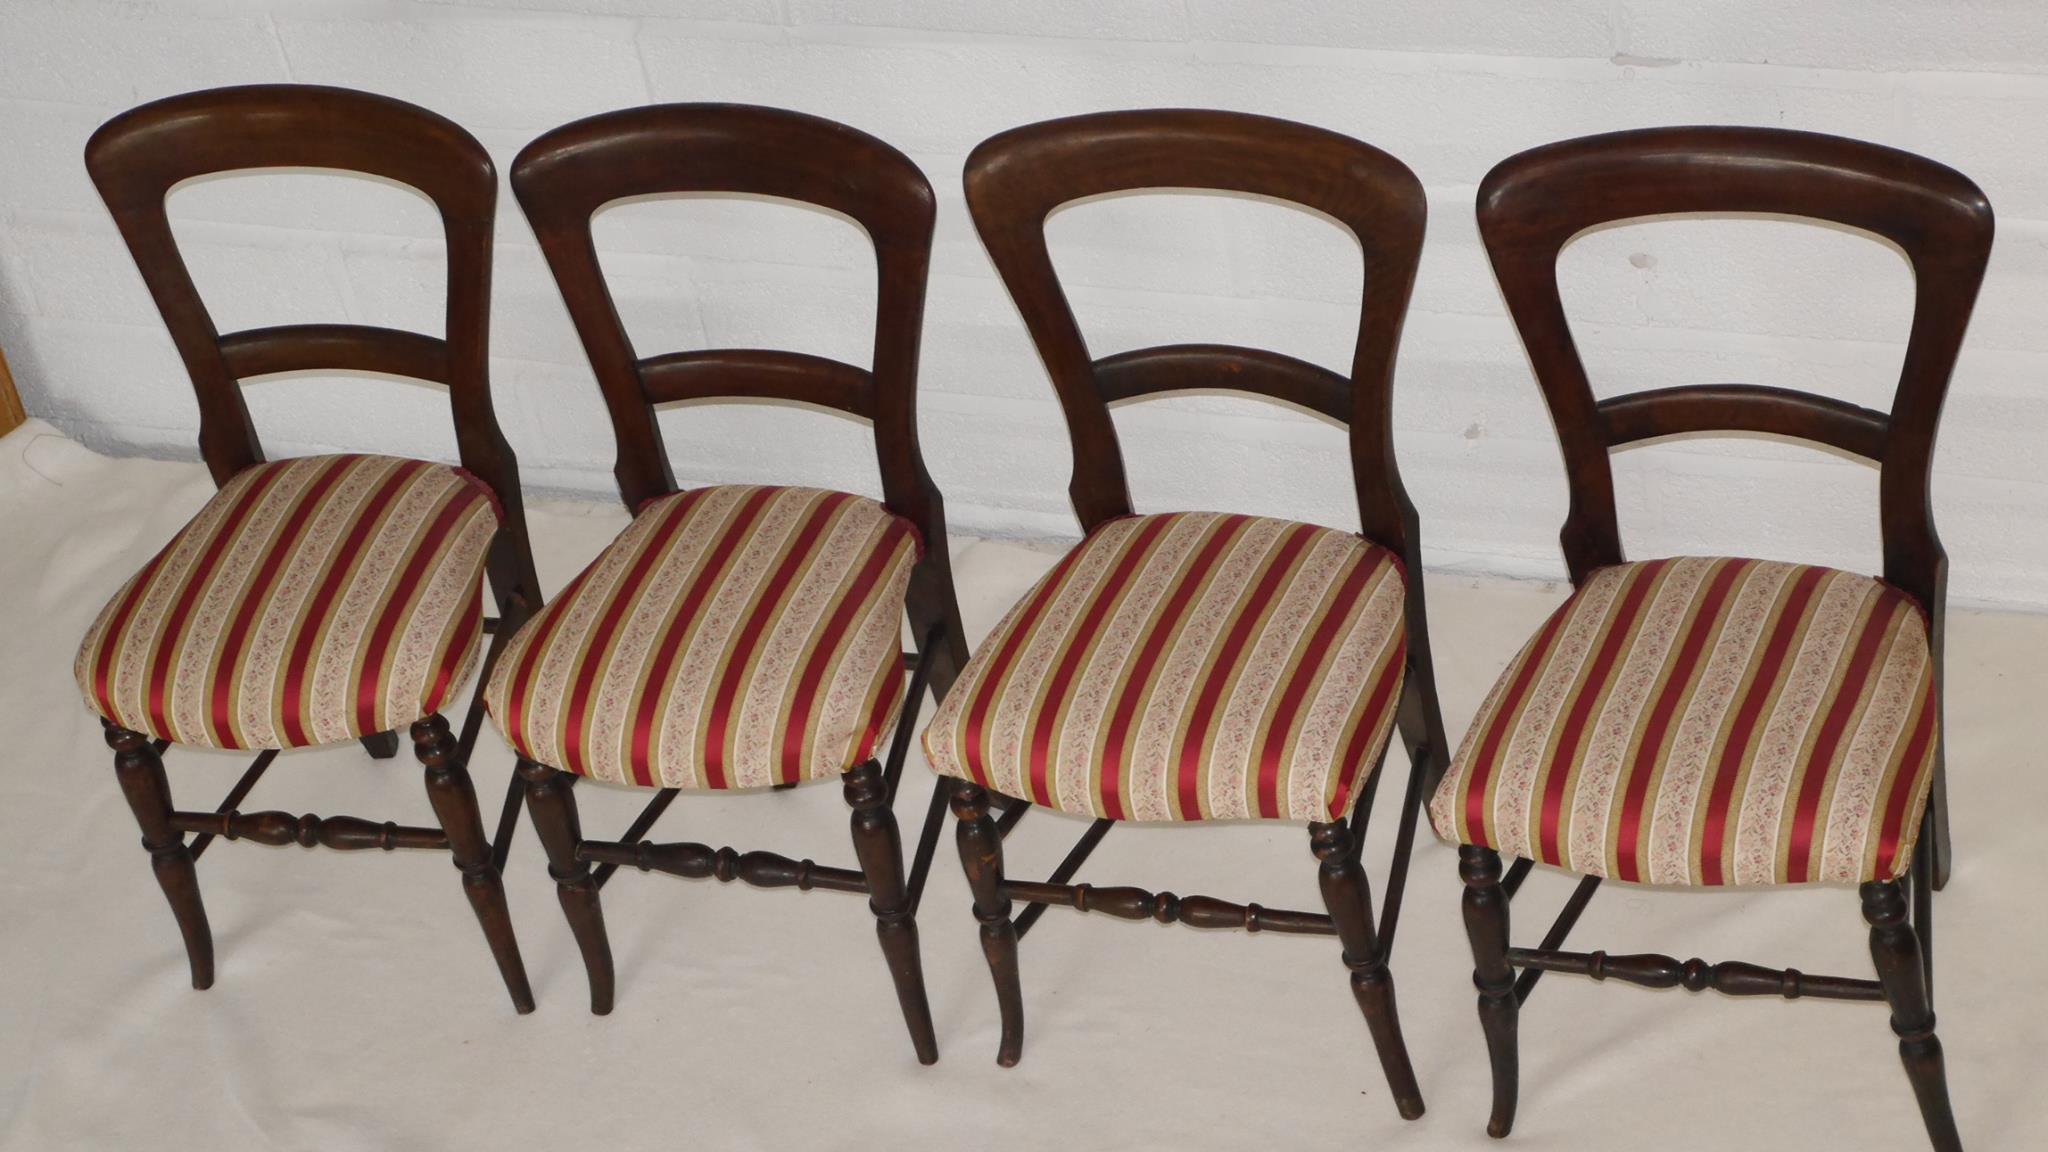 4 wooden chairs with red, gold and floral covers on side view